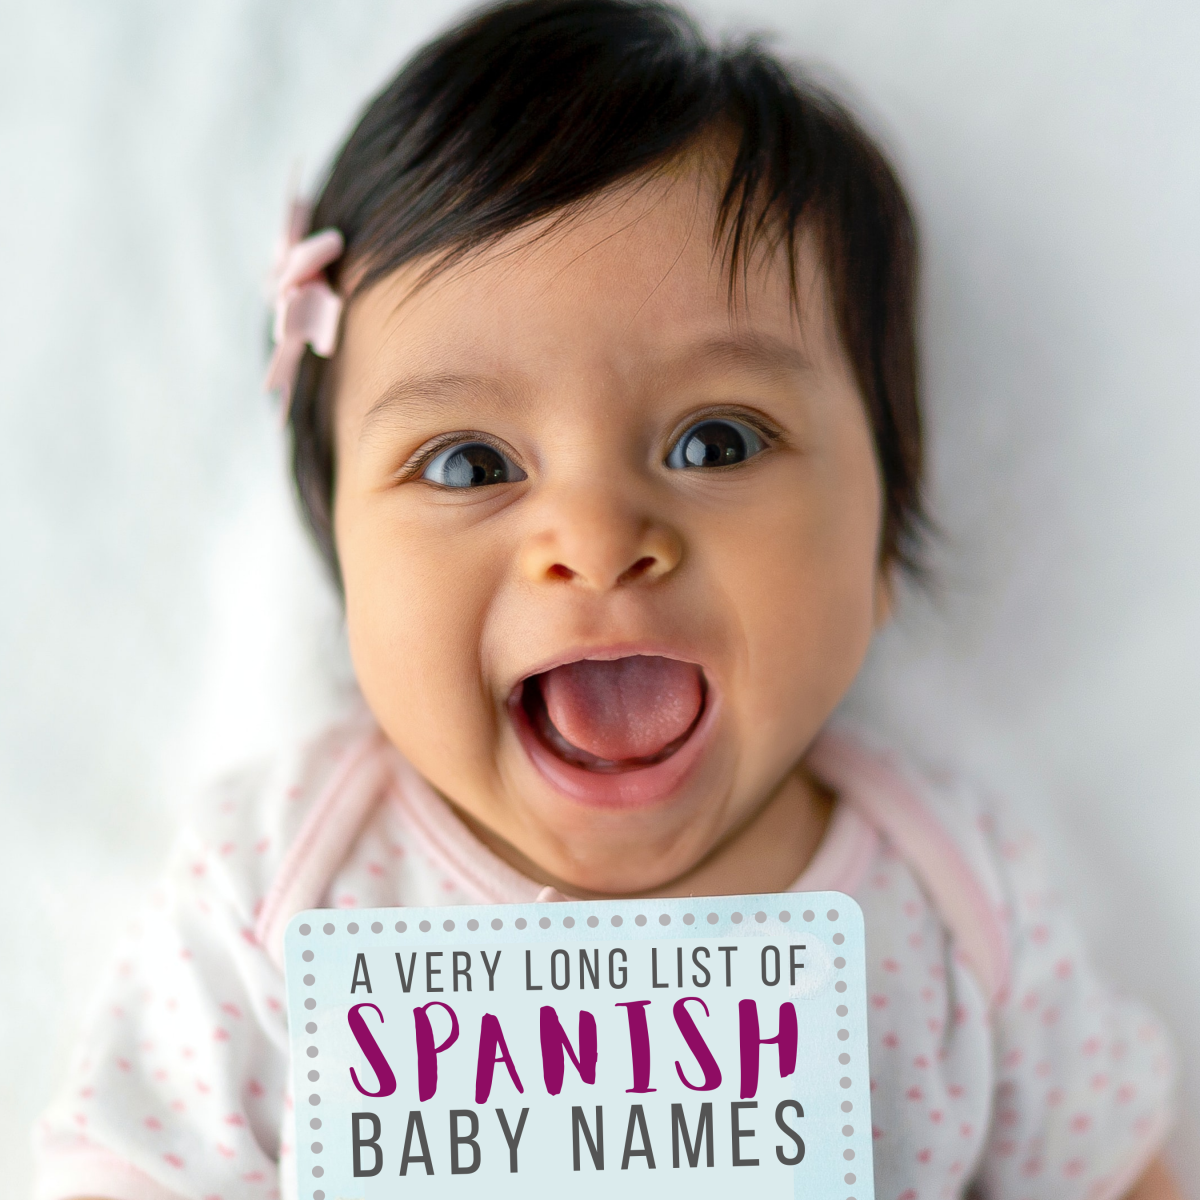 300+ Spanish Baby Names: Girls, Boys, and Gender Neutral